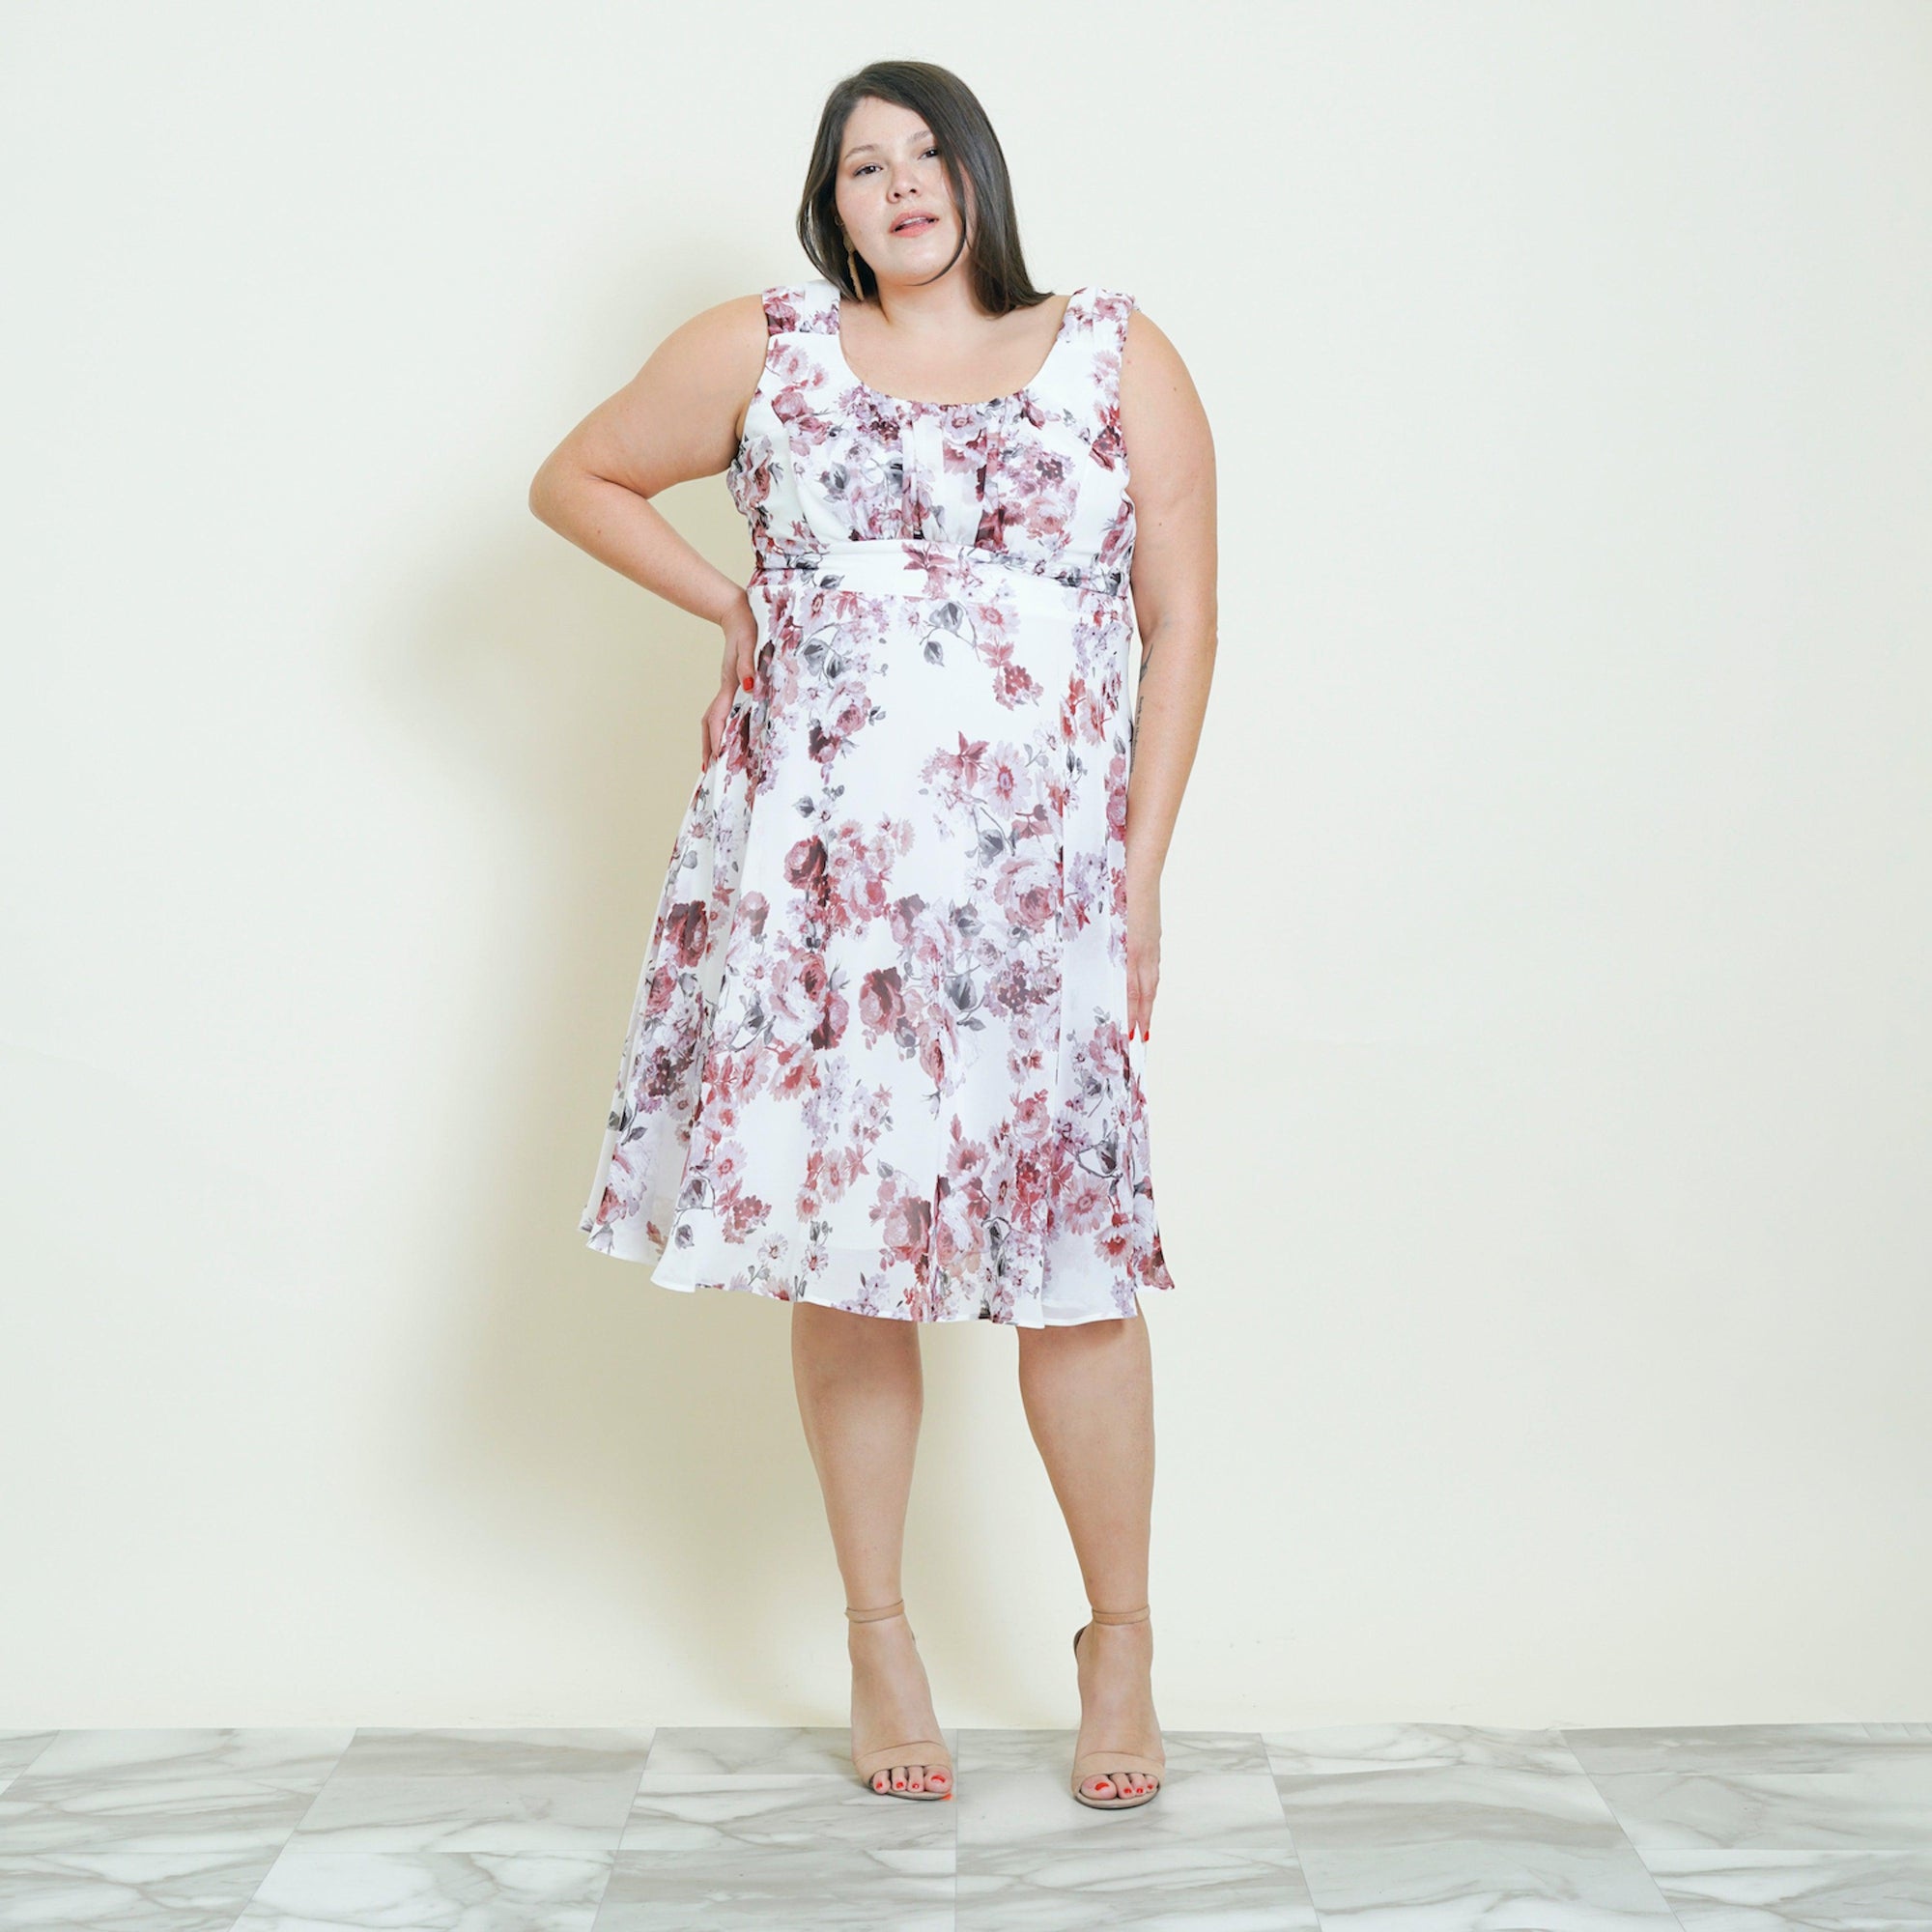 Woman posing wearing Mauve Carly Mauve Floral Chiffon Dress from Connected Apparel